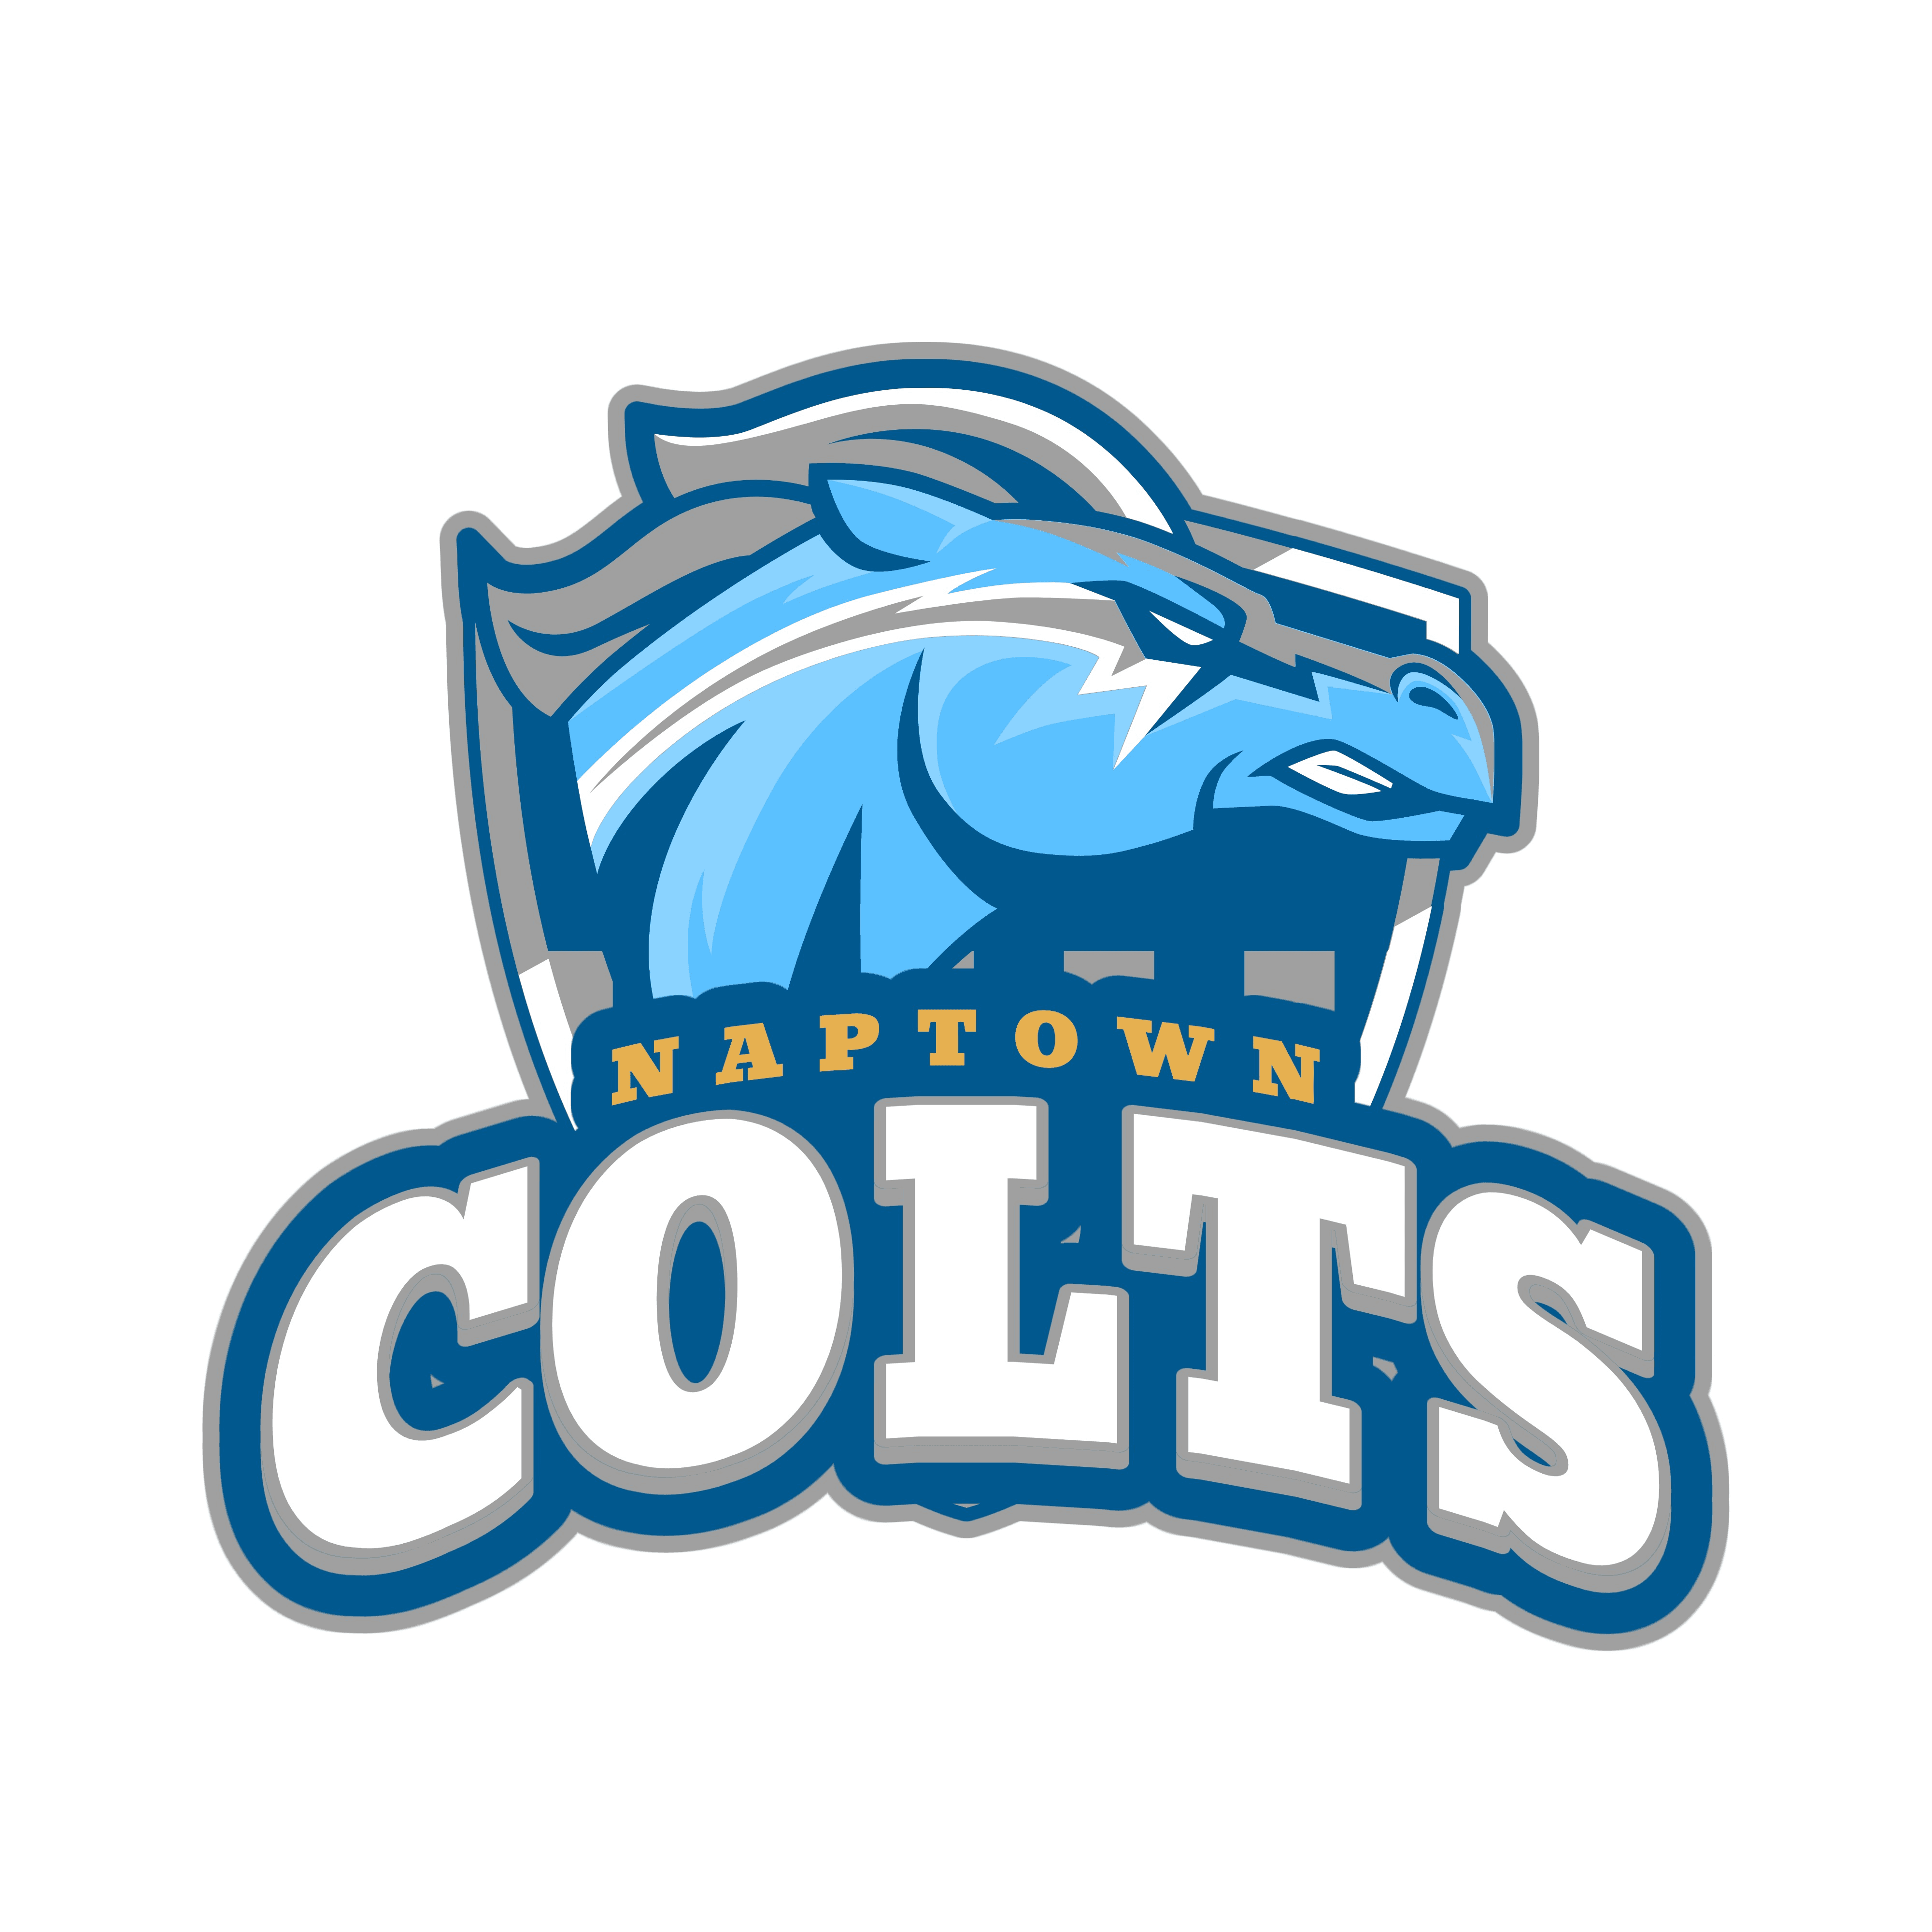 NaptownColts